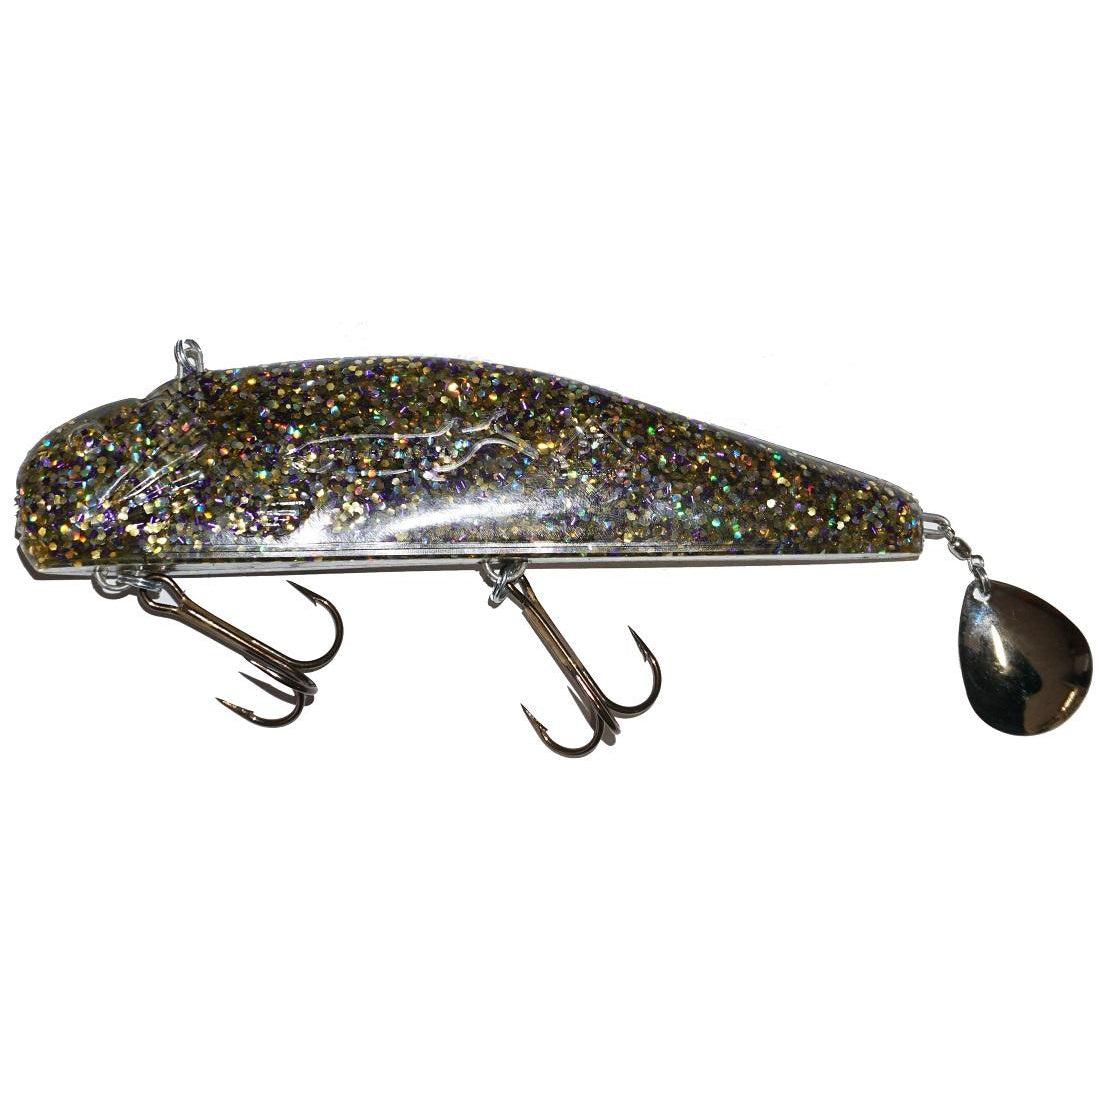 View of Jigs-Spoons Bondy Bait Co. Magnum Bondy Bait Jig Space Monkey available at EZOKO Pike and Musky Shop